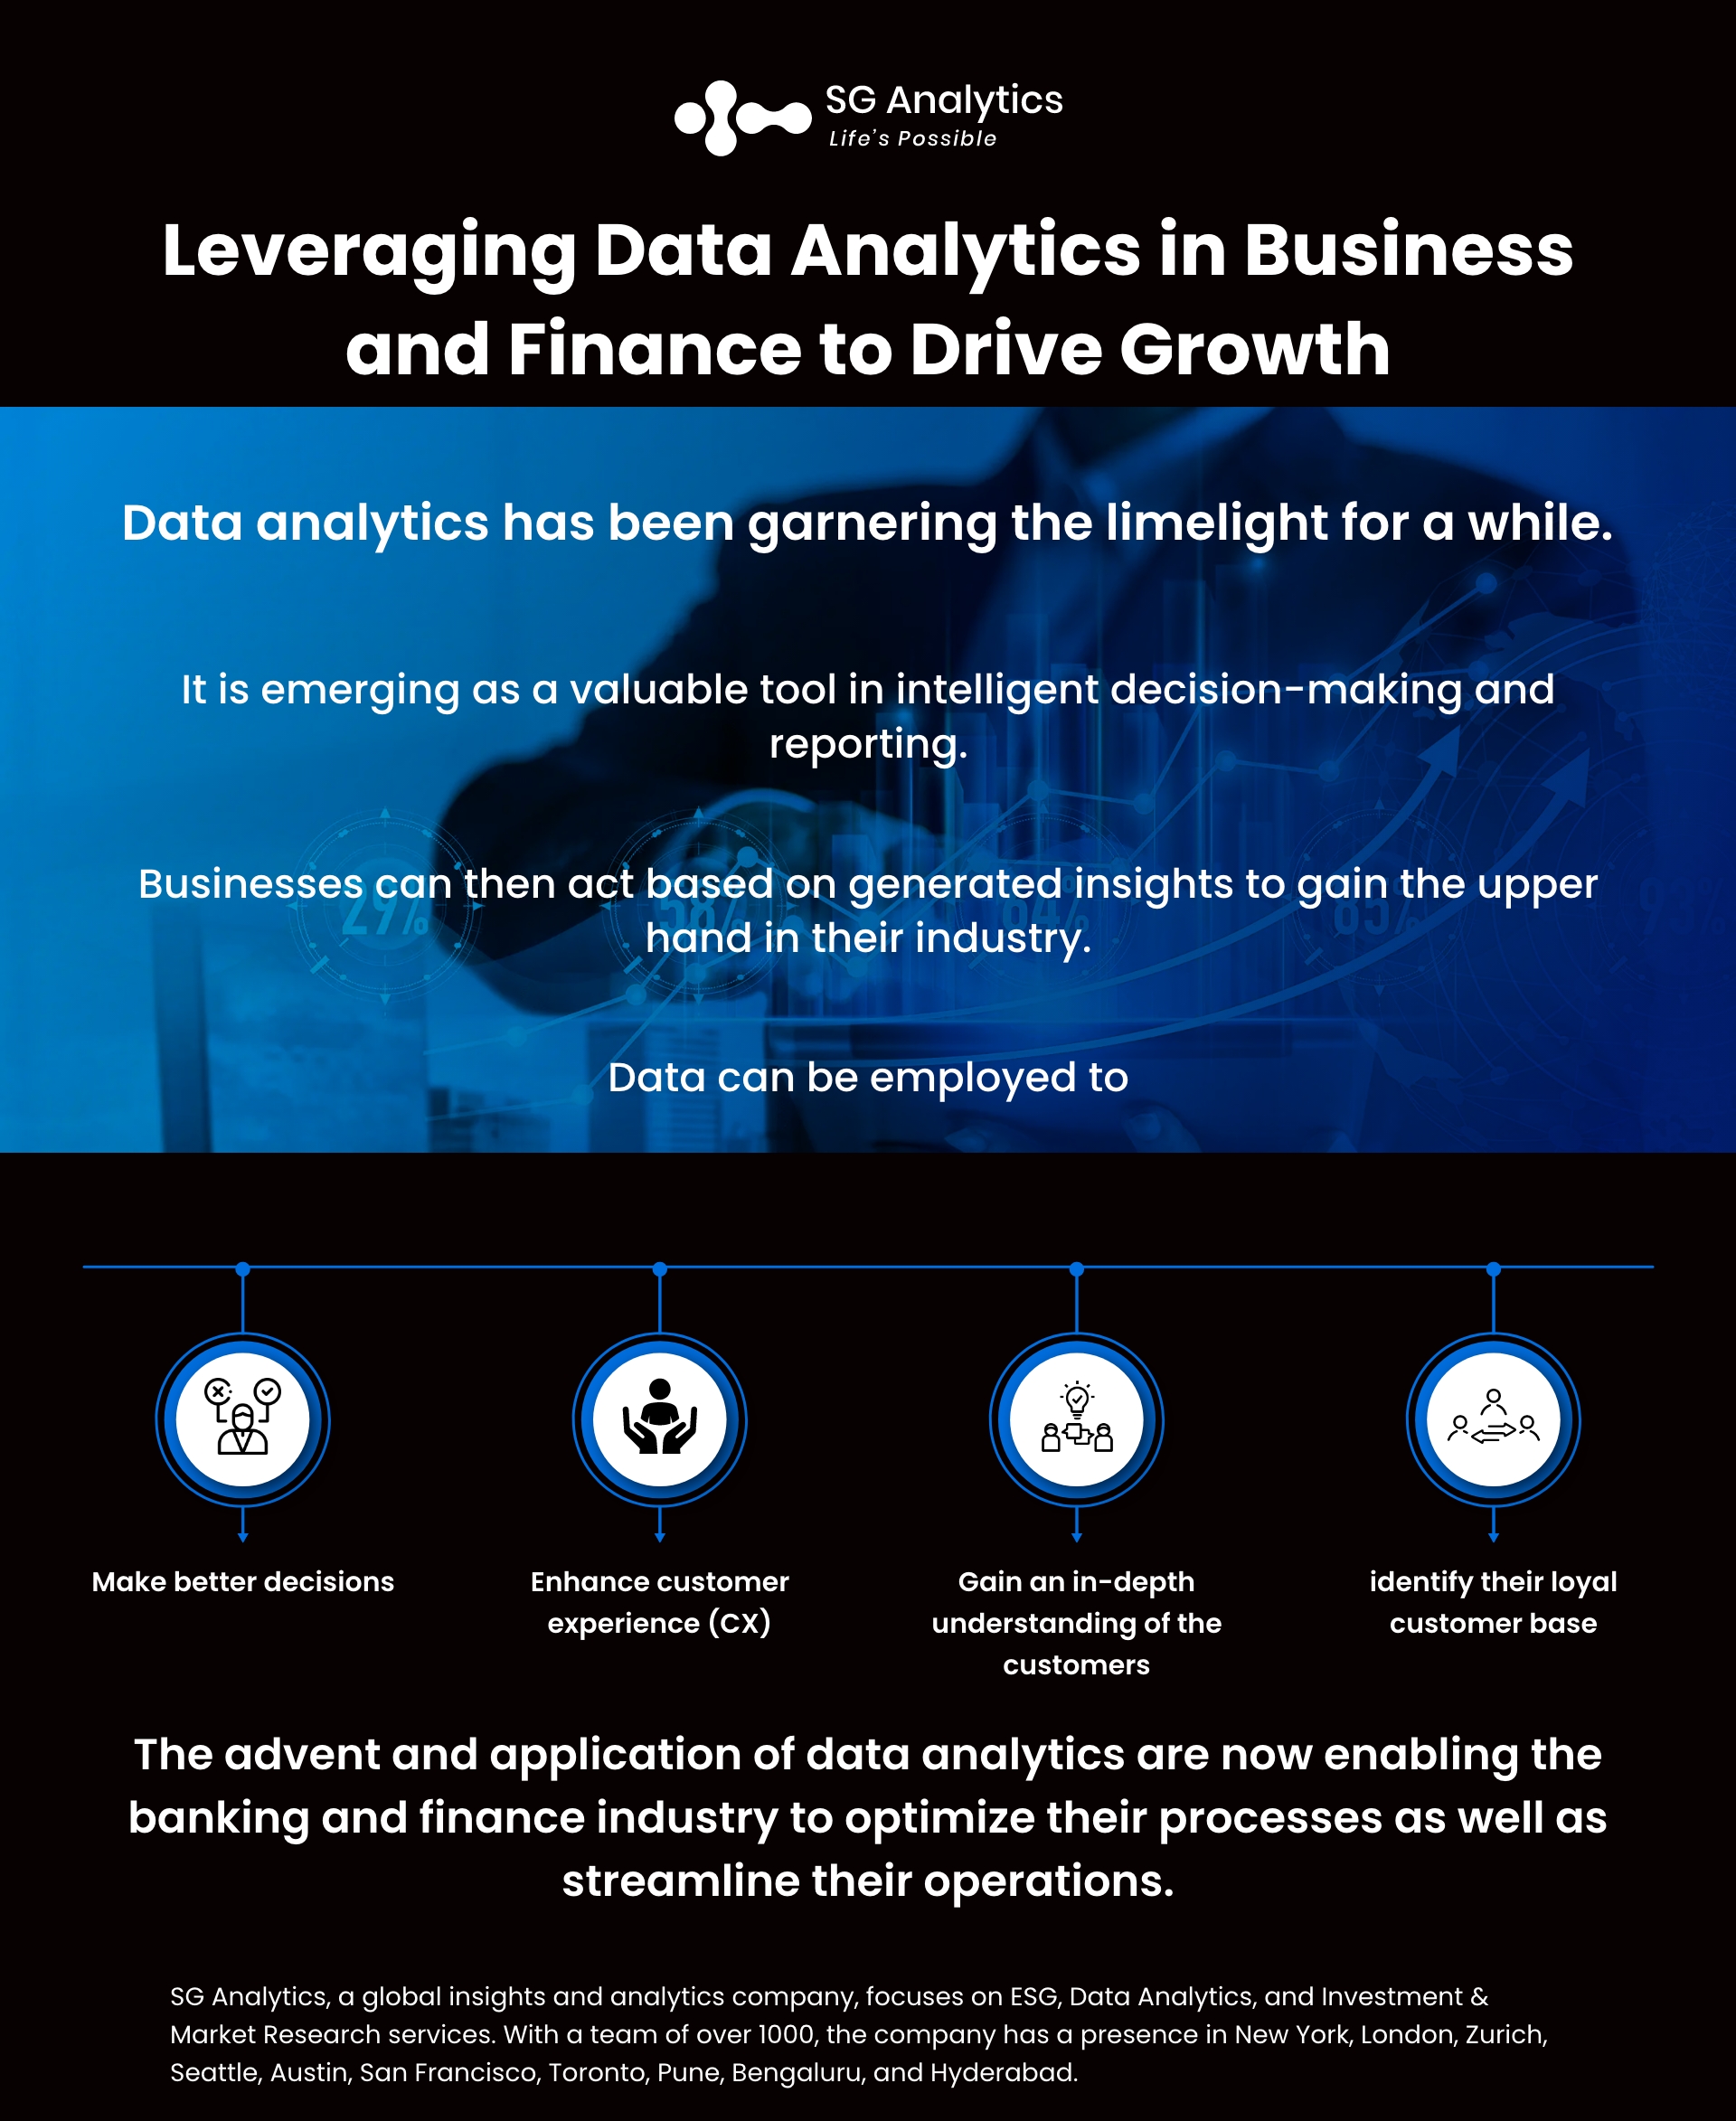 SGAnalytics_Infographic_Leveraging Data Analytics in Business and Finance to Drive Growth